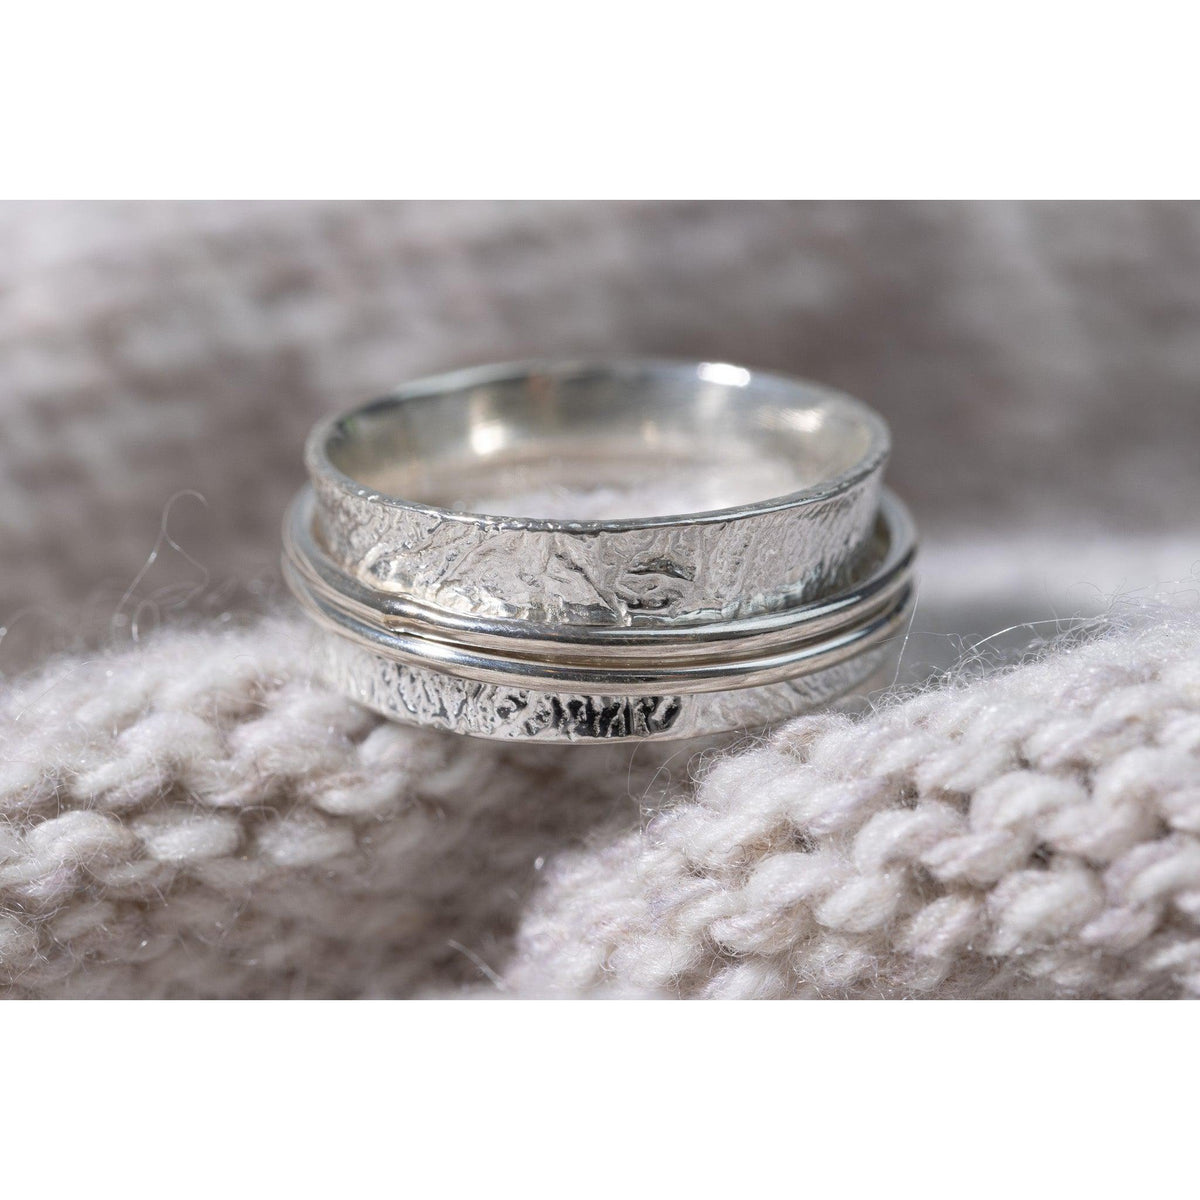 &#39;LG52 - Silver Double &#39;Worry&#39; Ring&#39; by Les Grimshaw, available at Padstow Gallery, Cornwall